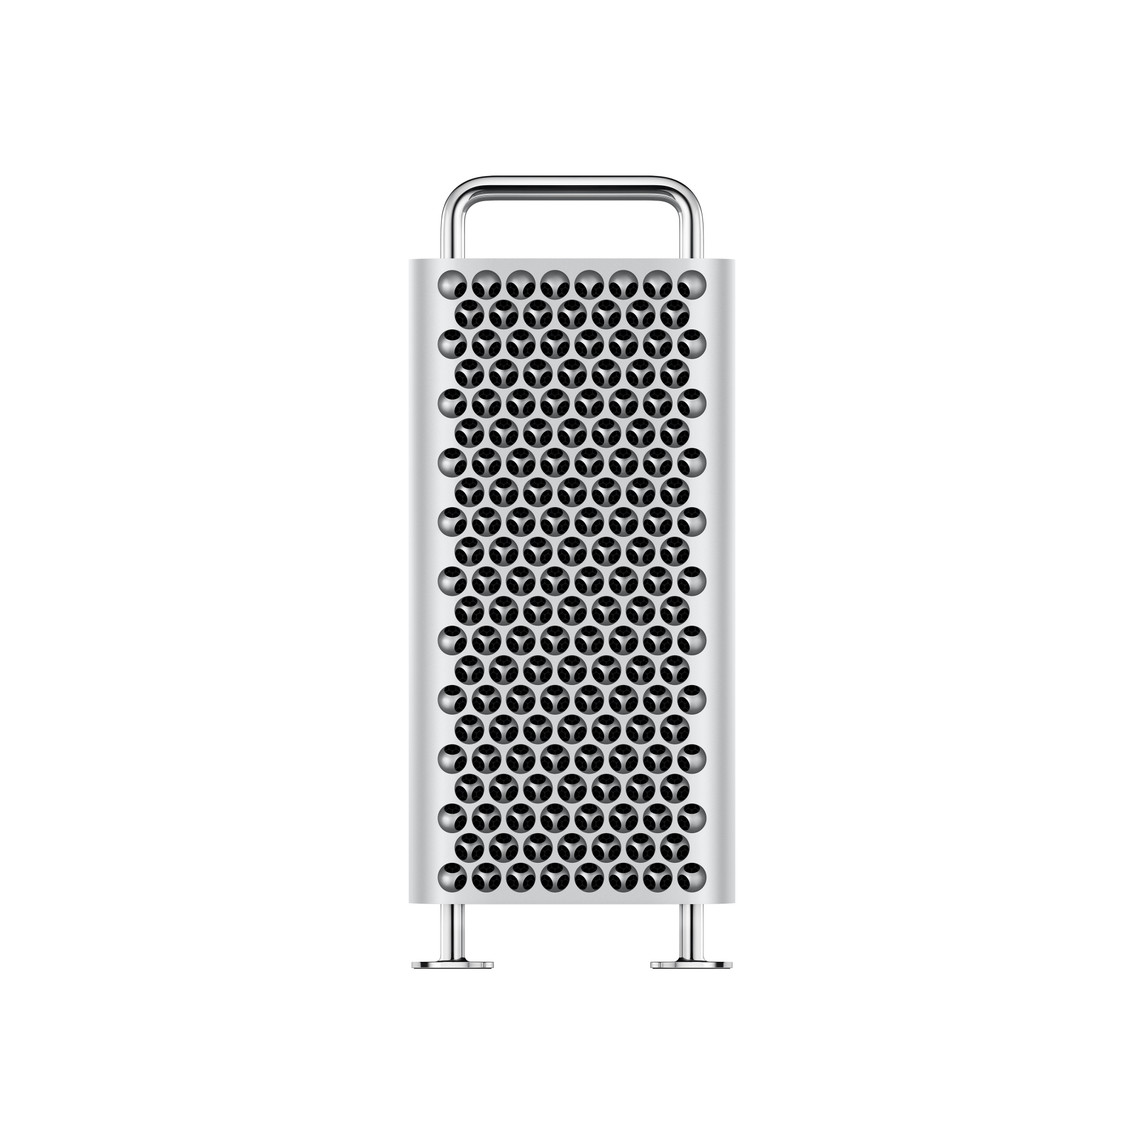 Mac Pro tower, front, rounded handle, top to bottom spherical lattice ventilation pattern, an internal and external spherical array